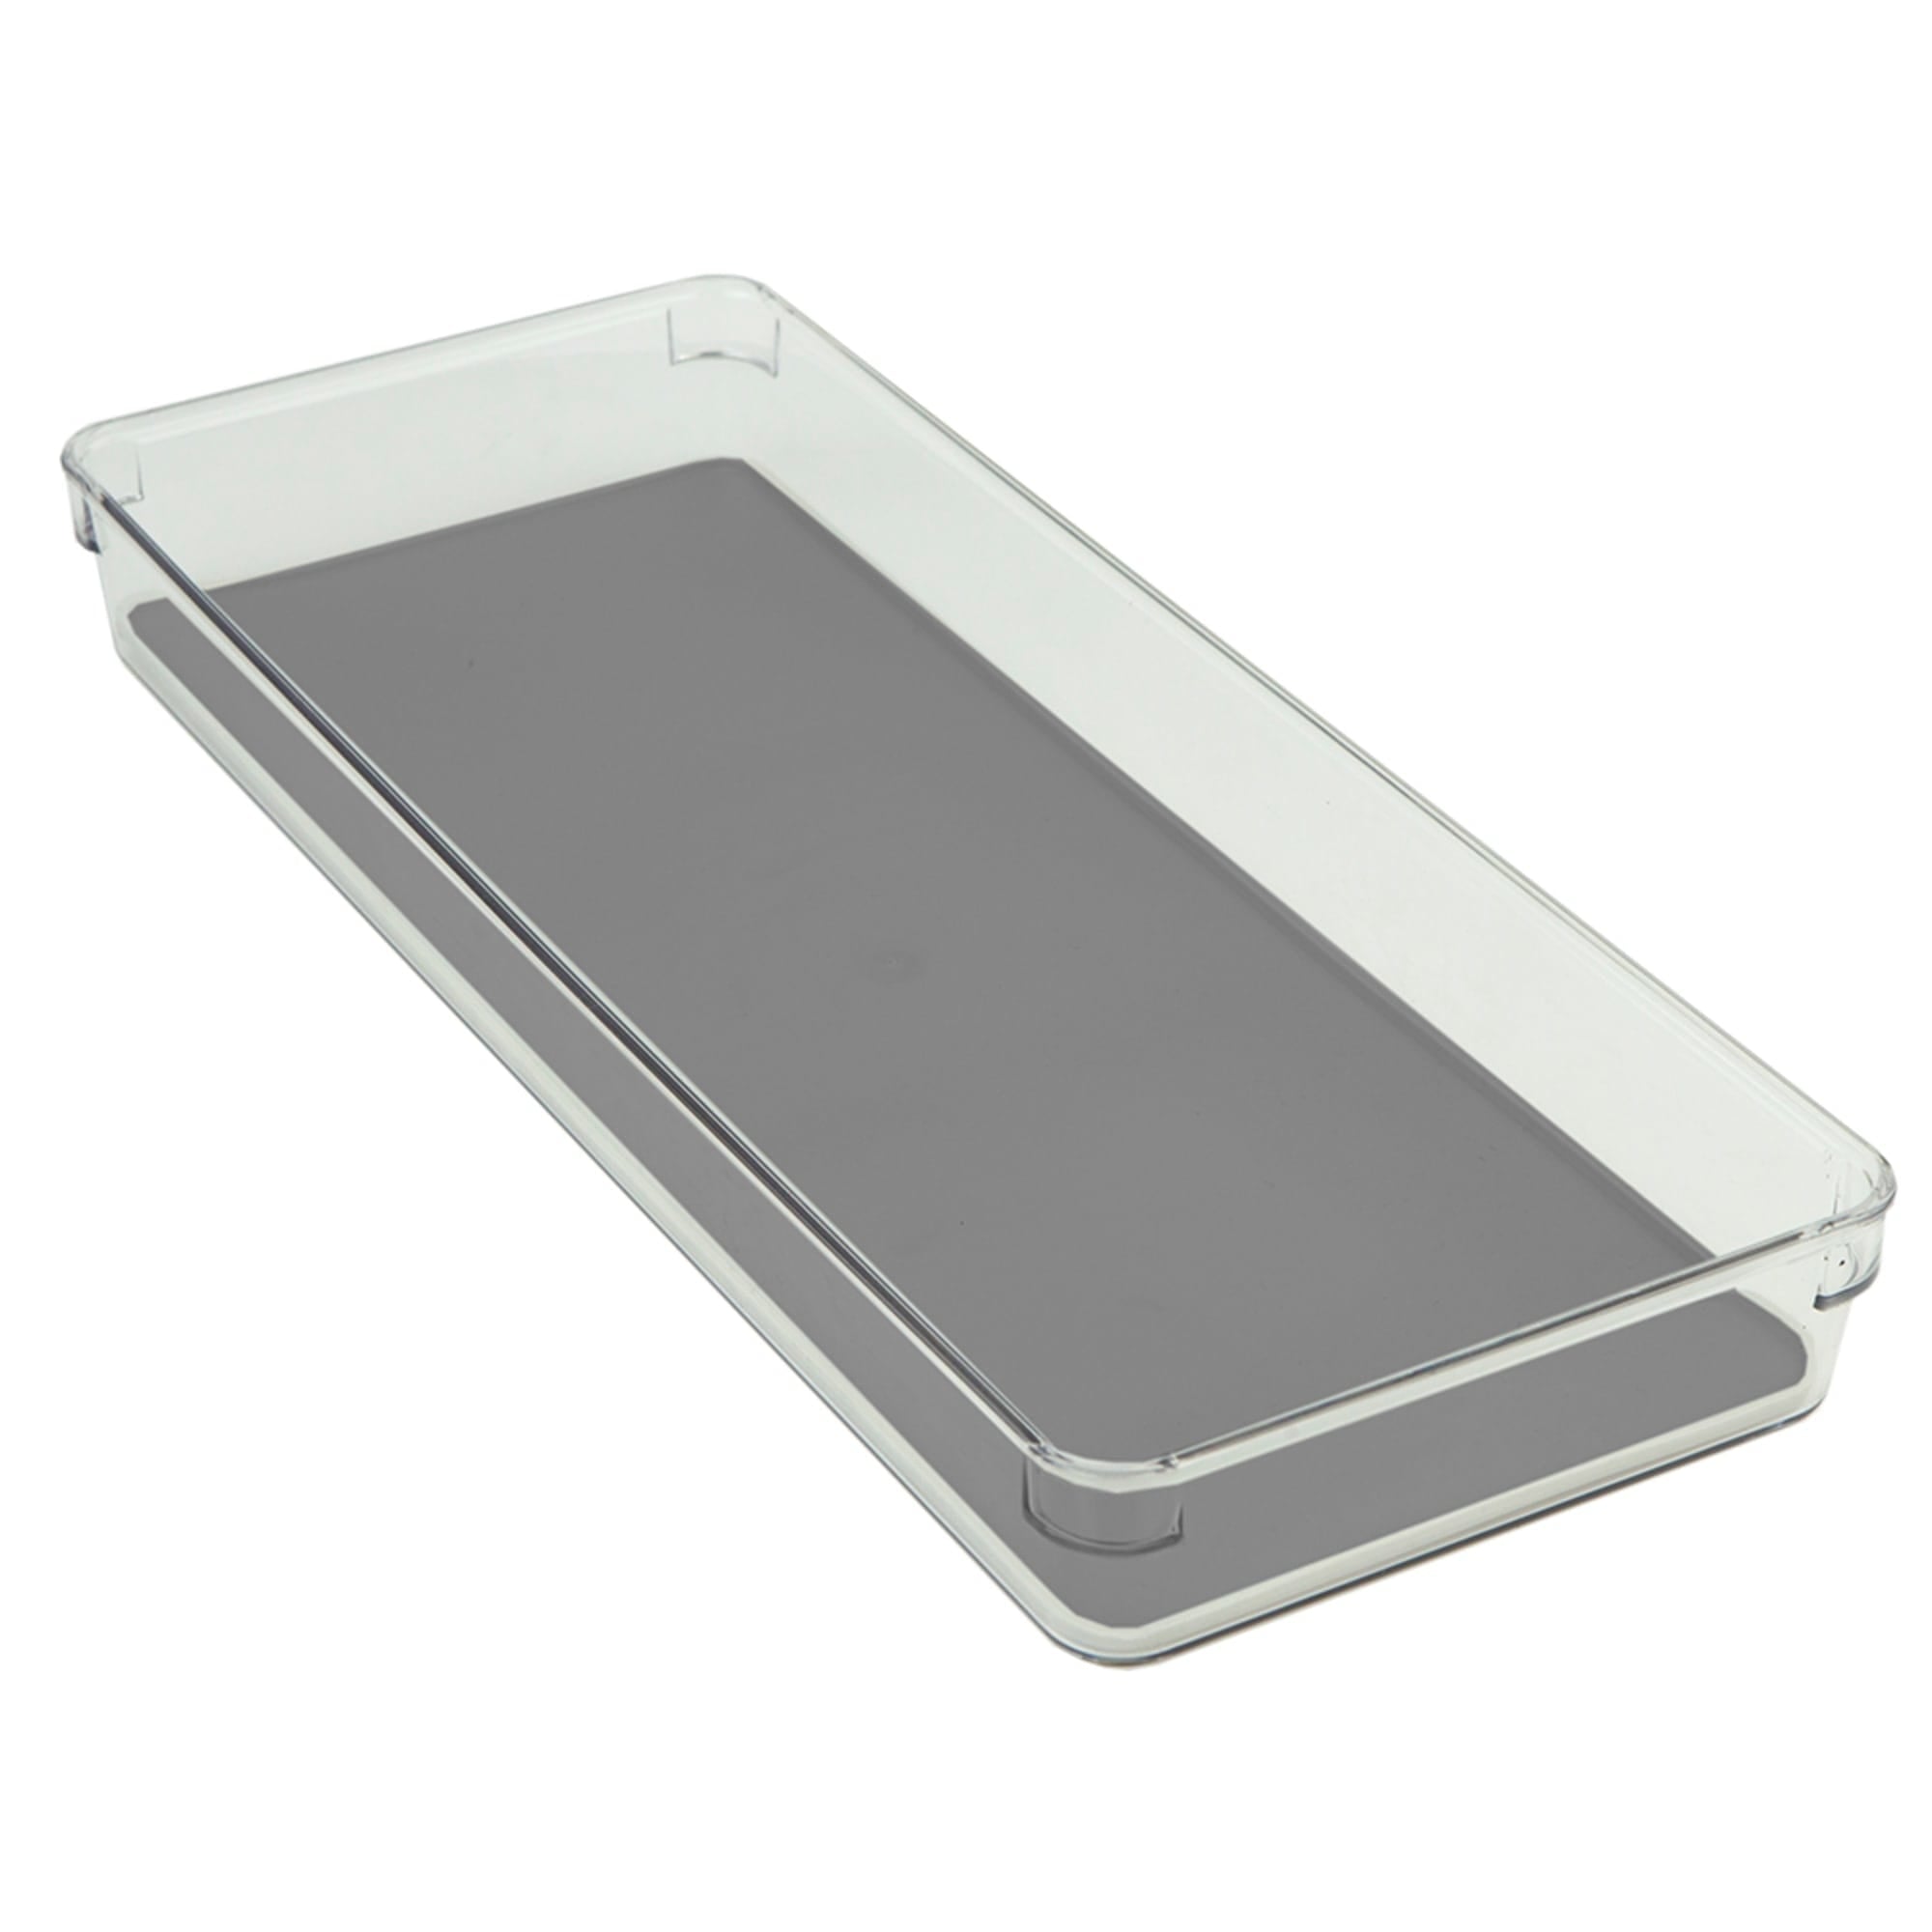 Home Basics 6" x 15" x 2" Plastic Drawer Organizer with Rubber Liner $5.00 EACH, CASE PACK OF 24